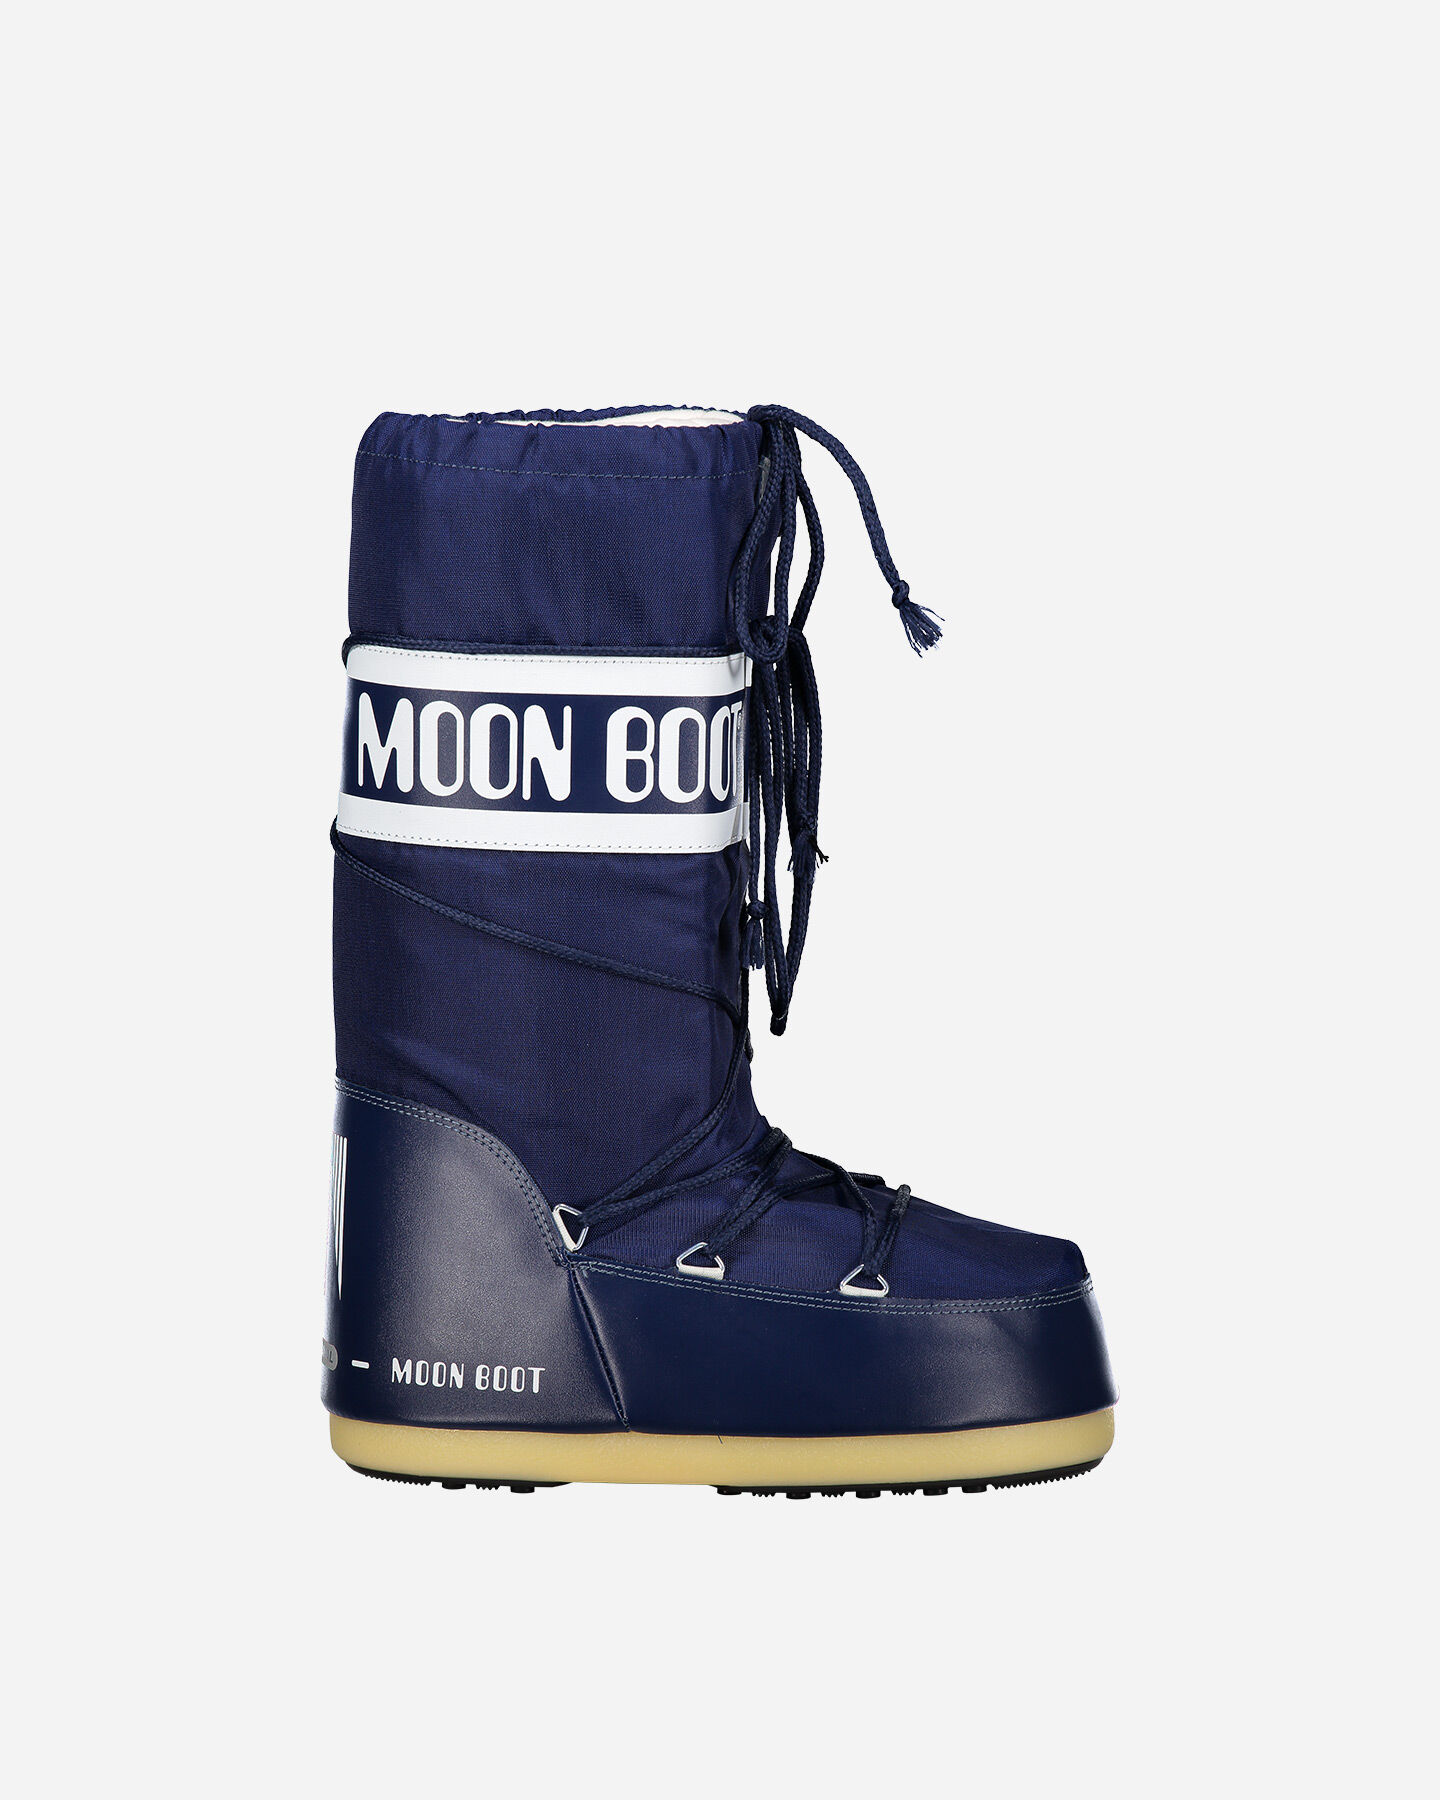  Doposci MOON BOOT MOON BOOT M S0595667|660|3538 scatto 0